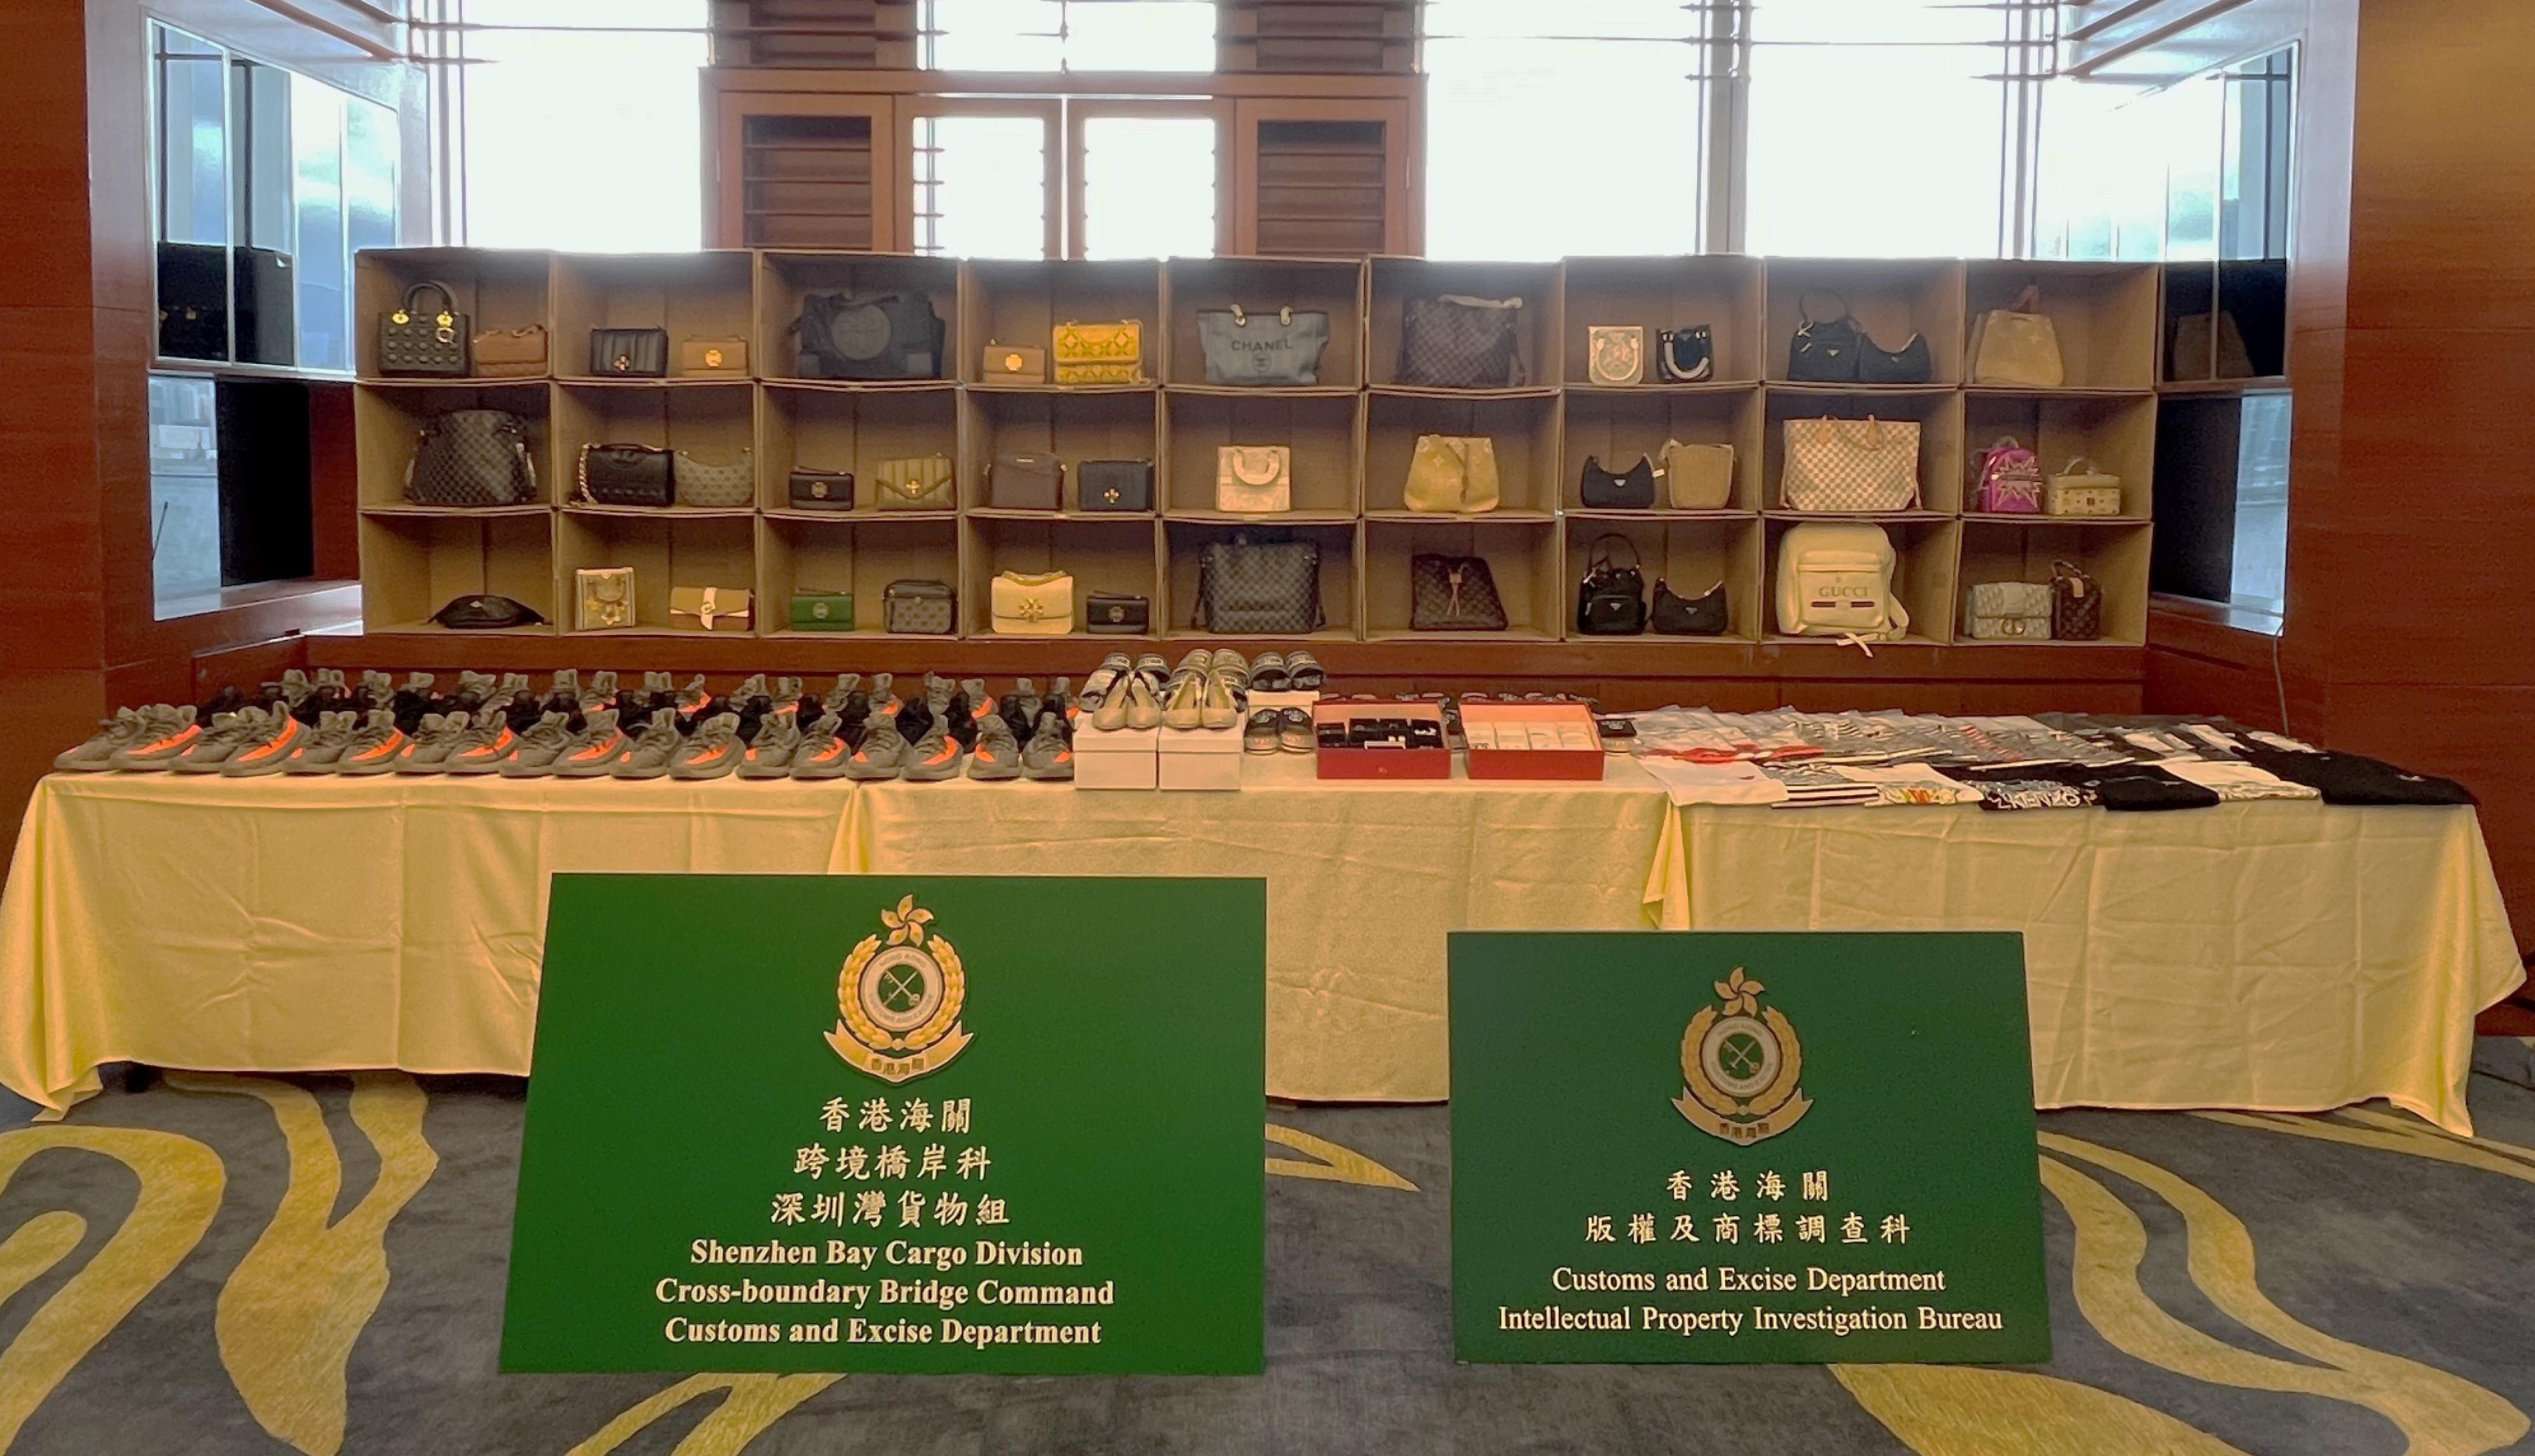 Hong Kong Customs conducted a series of operations between May 17 and June 9 to combat cross-boundary transshipment and local sale of counterfeit goods and detected 11 cases in total. About 10 000 items of suspected counterfeit goods, including footwear, mobile phones, clothing, watches, handbags and fashion accessories, and about 9 300 suspected alternative smoking products, with an estimated market value of over $11.6 million, were seized. Photo shows some of the suspected counterfeit goods seized.